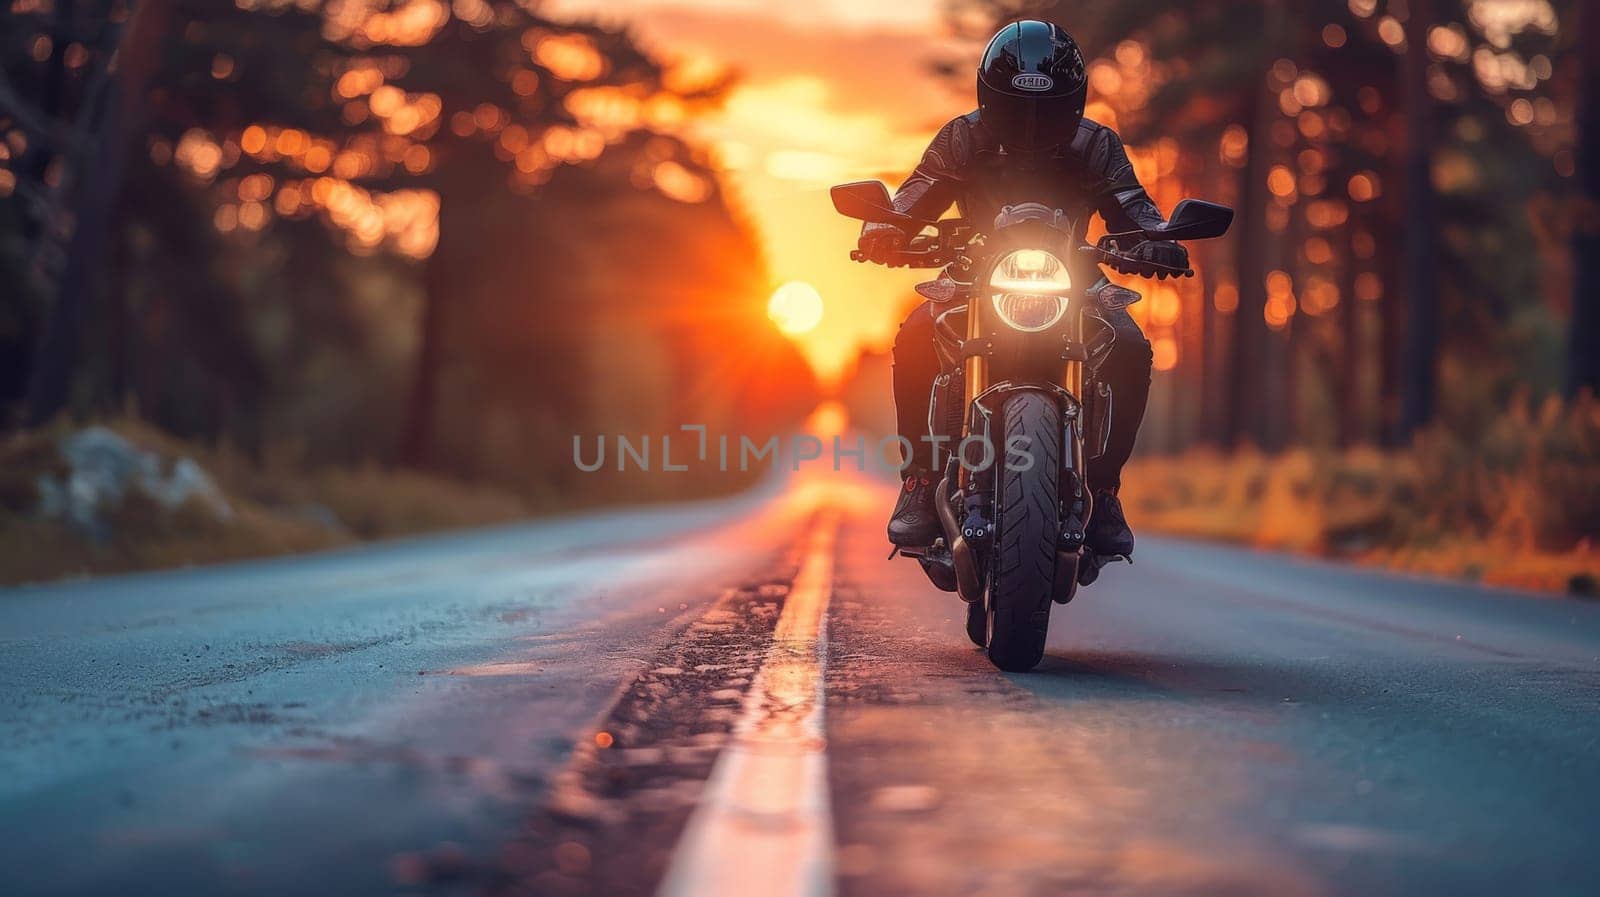 professional motorbike rider on road, motorcycle on road with the beautiful nature landscape view.